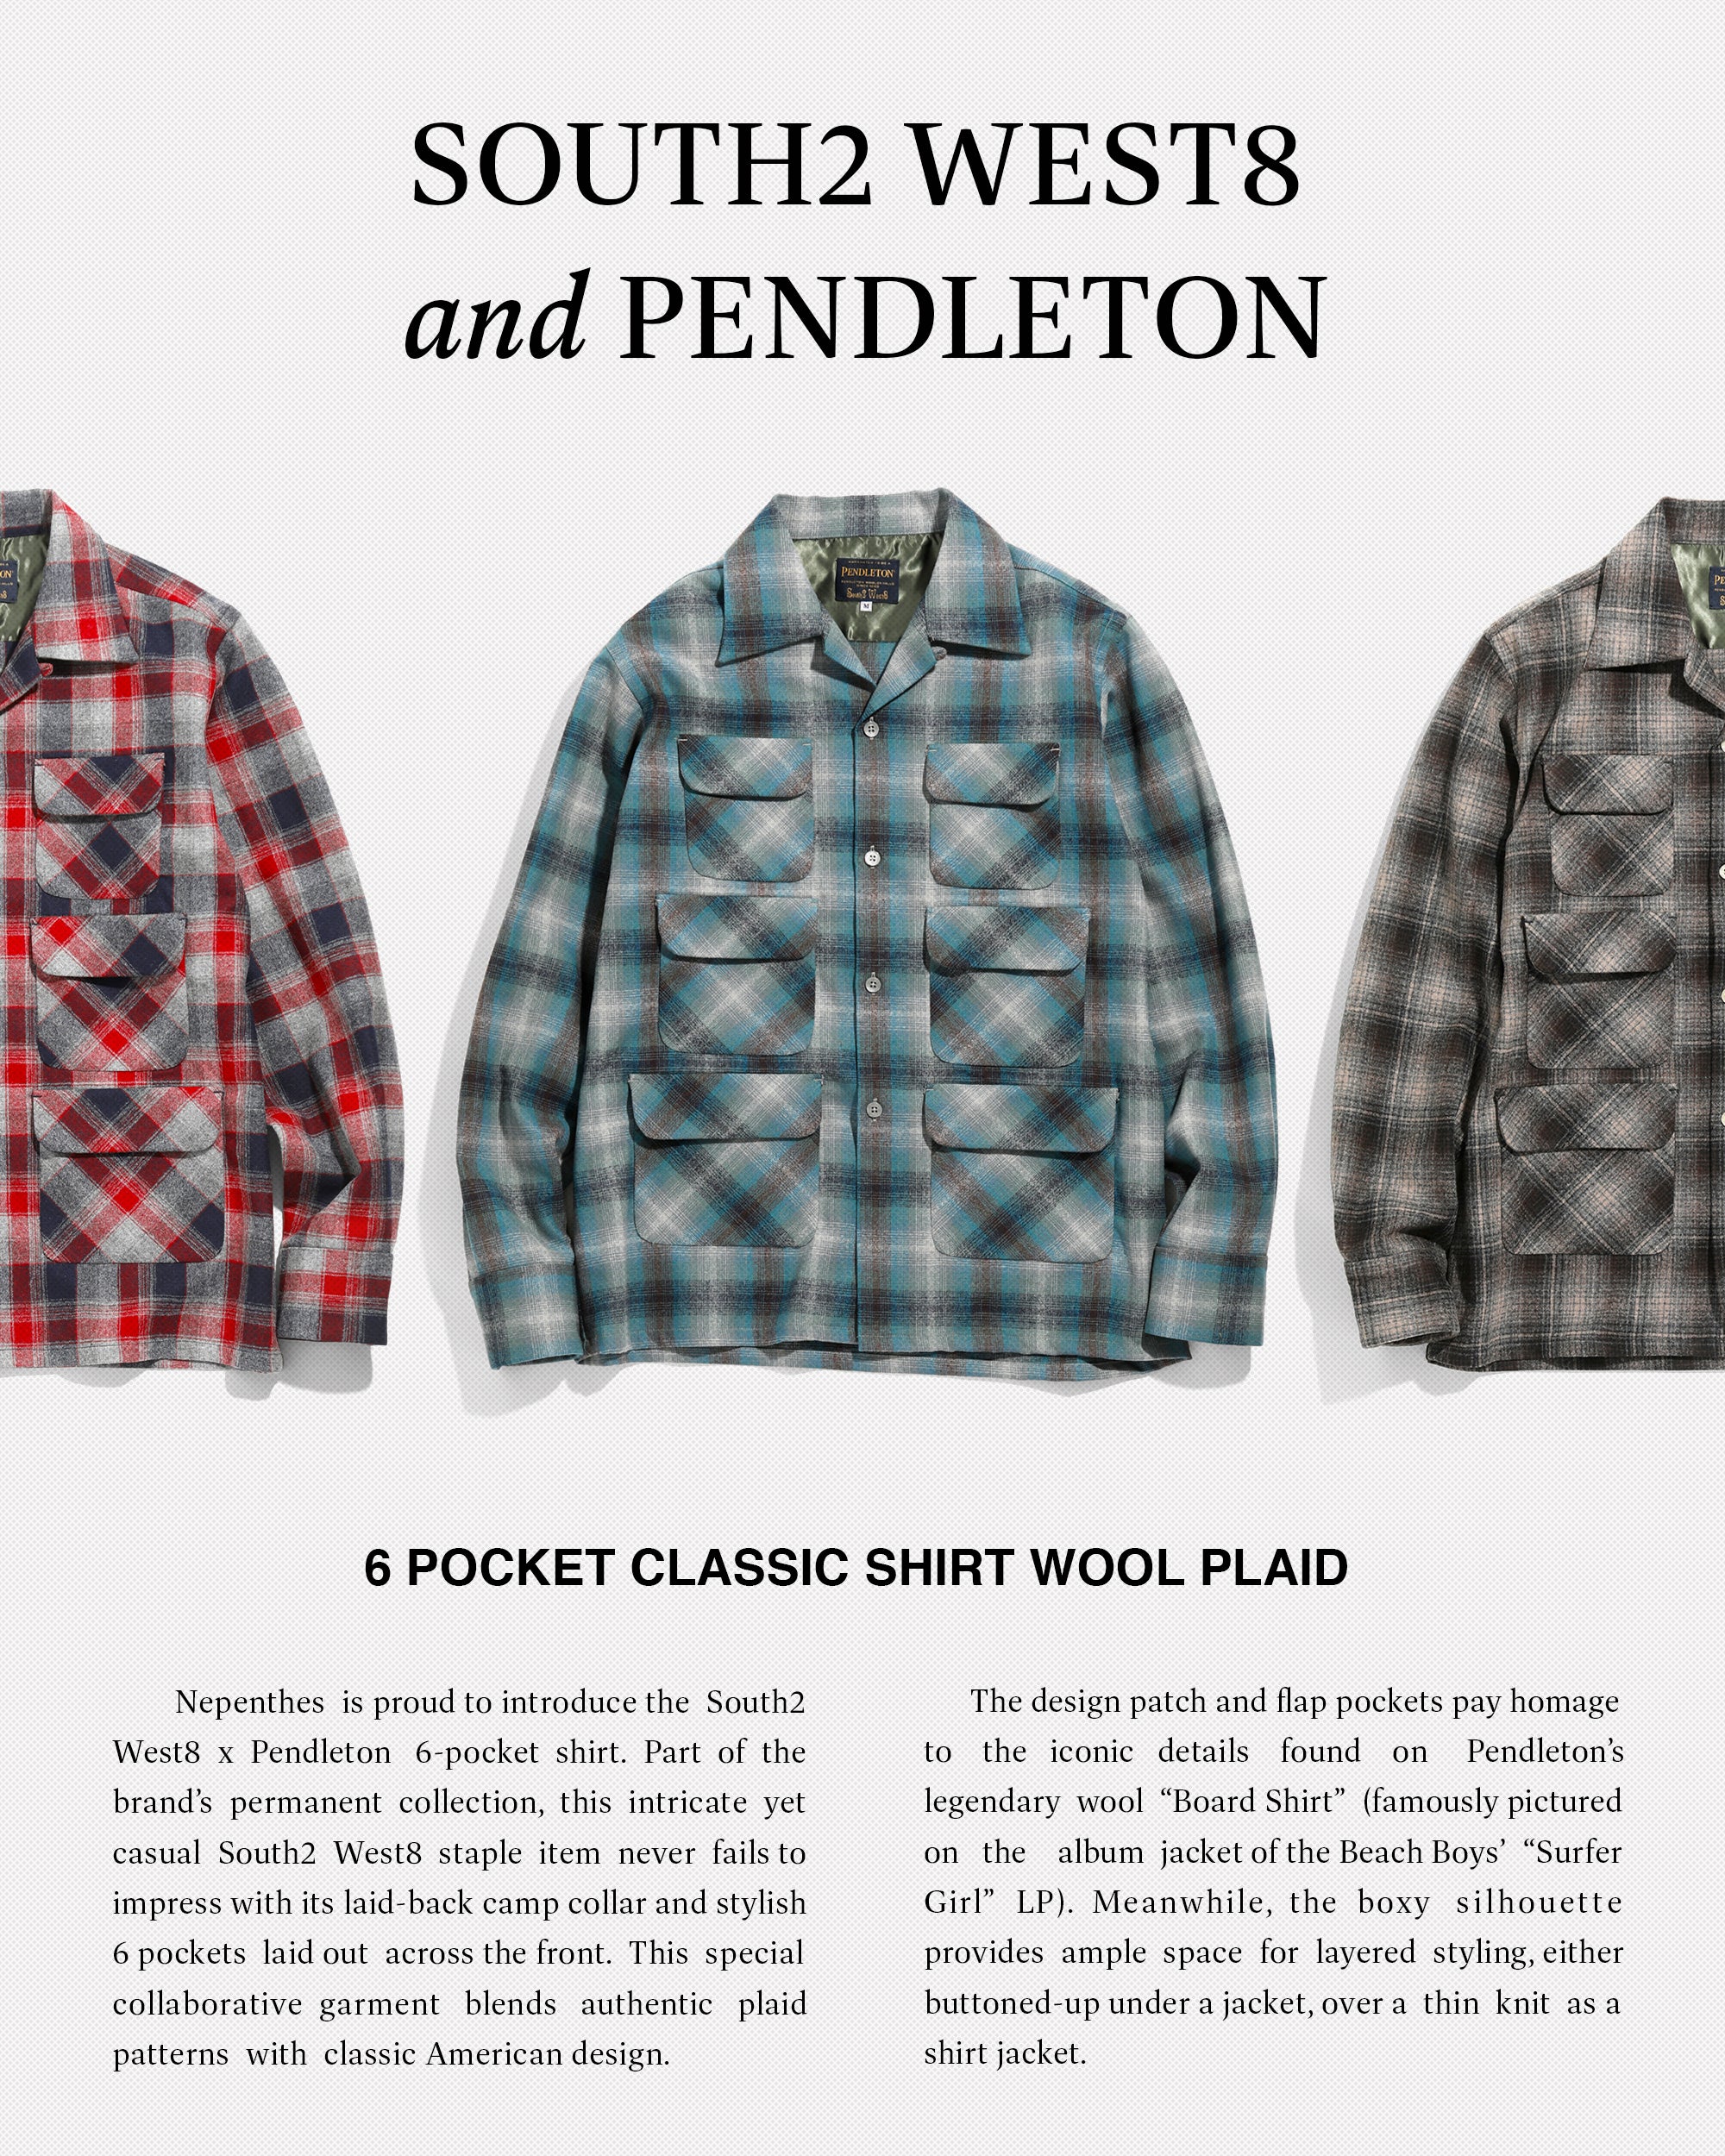 SOUTH2 WEST8 x PENDLETON - 6 POCKET CLASSIC SHIRT | Nepenthes New York